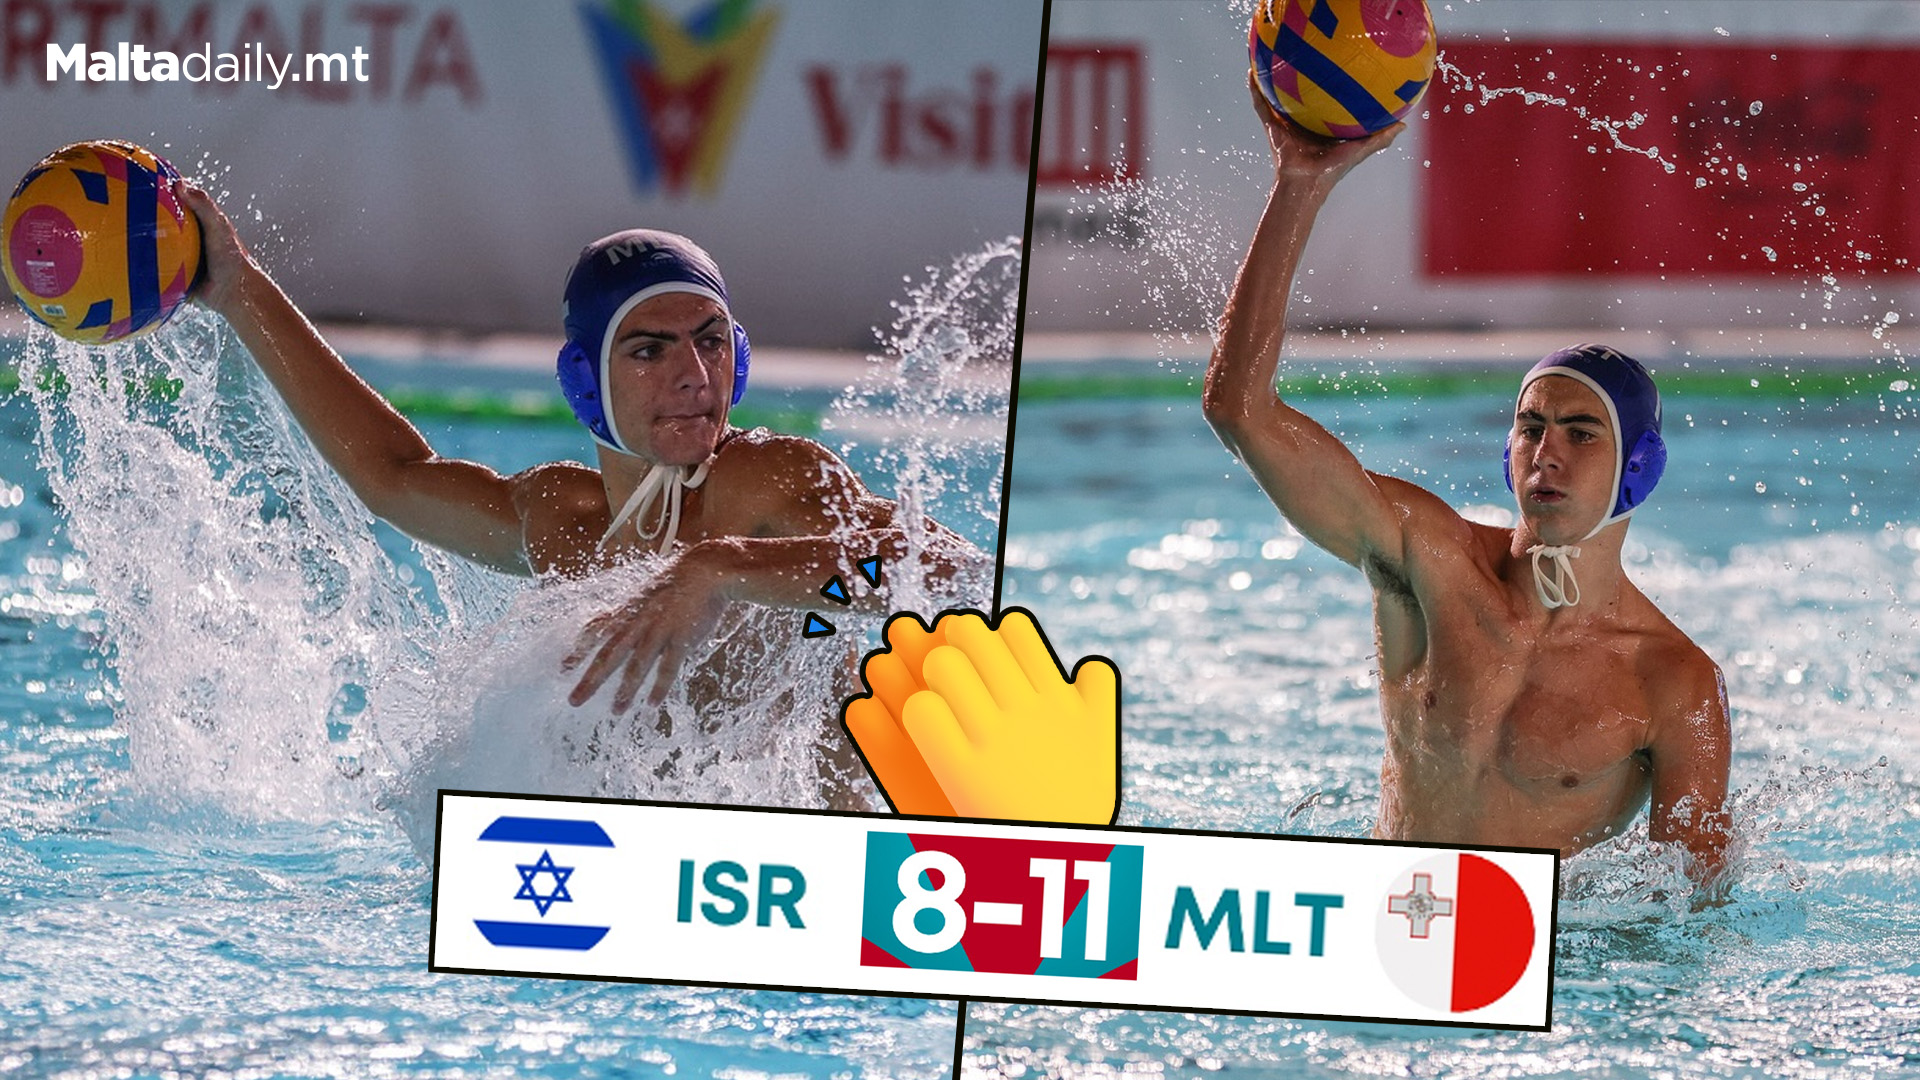 Malta Beat Israel To Finish In 17th Overall Place